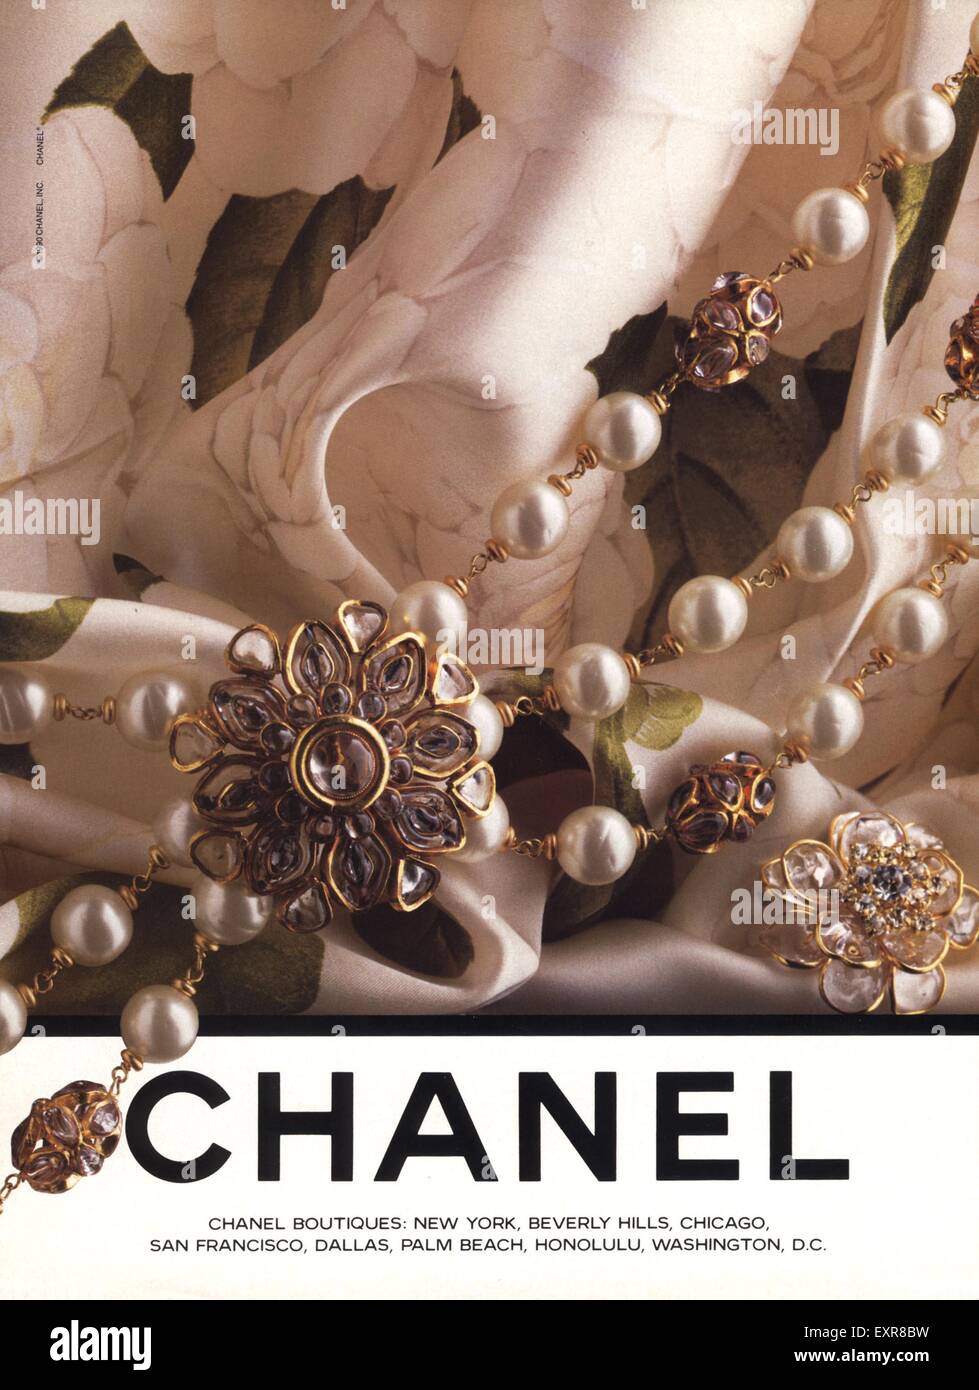 Chanel heads up V&A's exhibition schedule for 2023